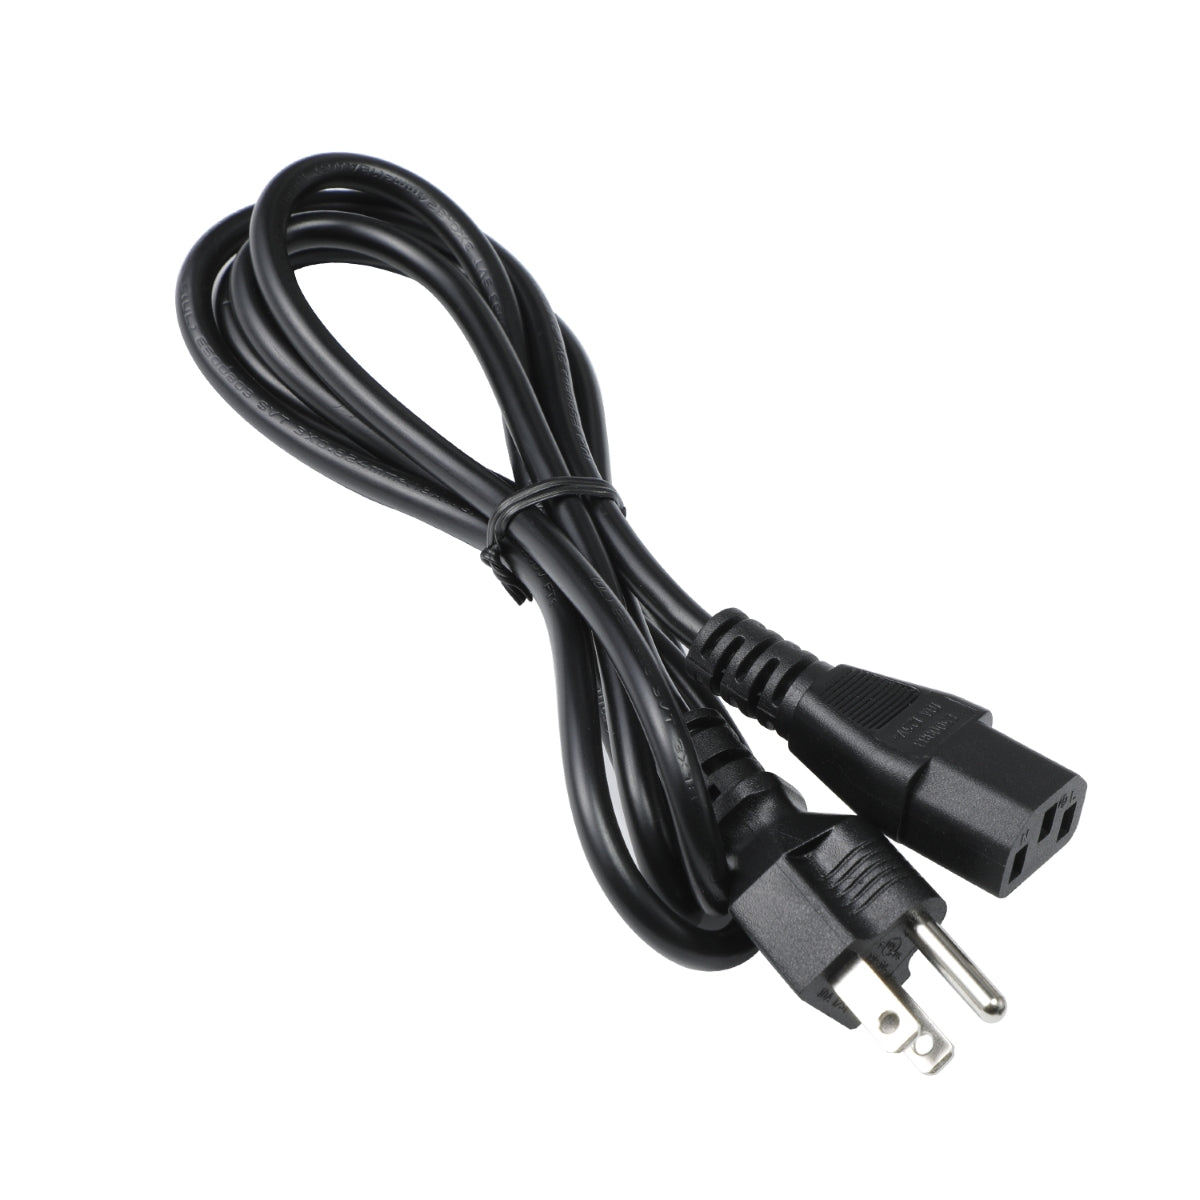 Power Cord for ION Explorer Outback.